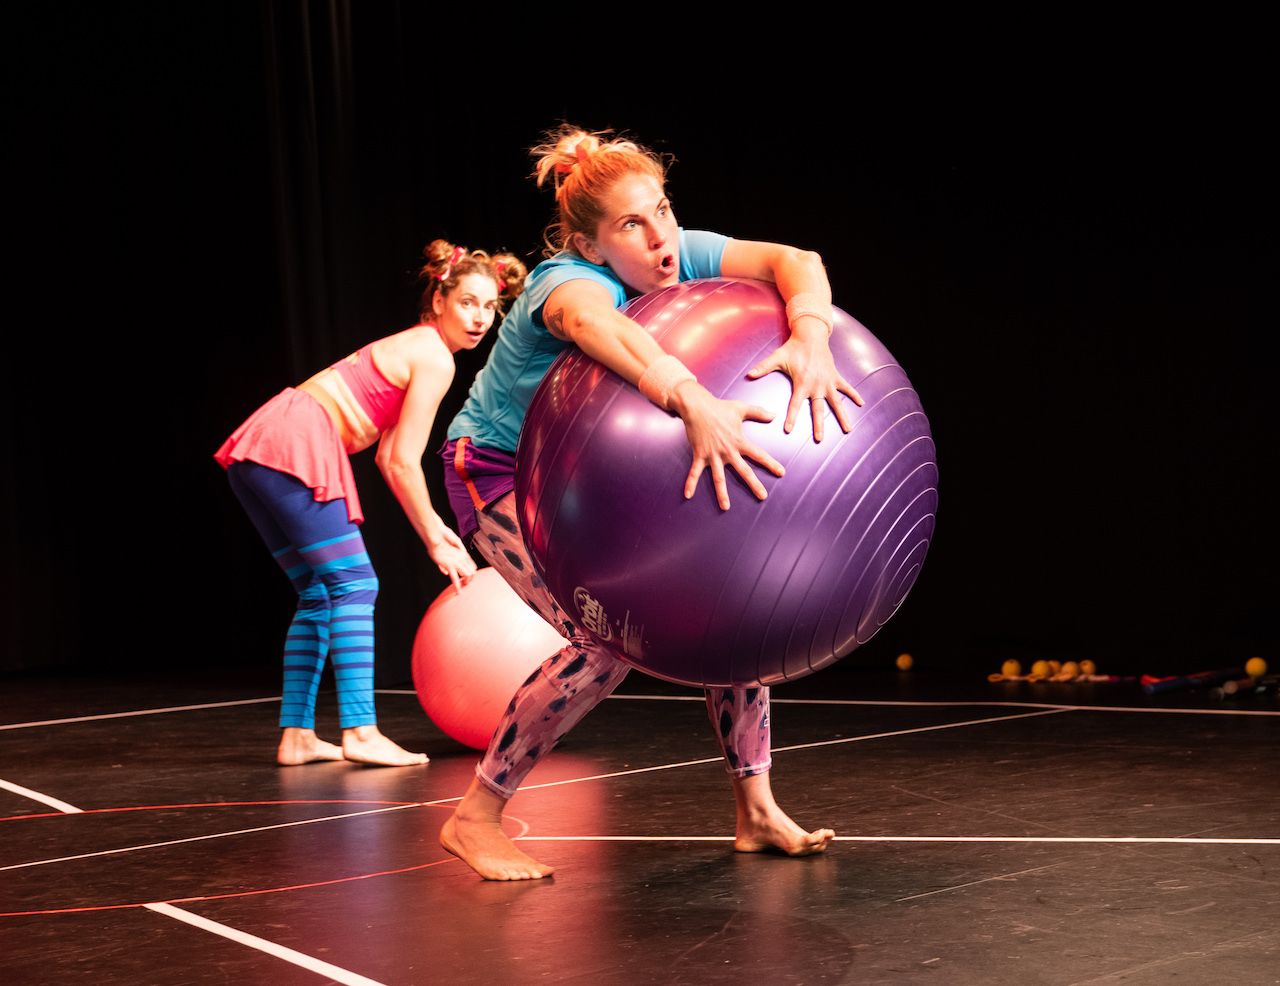 Promotional image of performers from  CATCH! by Maxima Circus happening at KPAC in March 2022